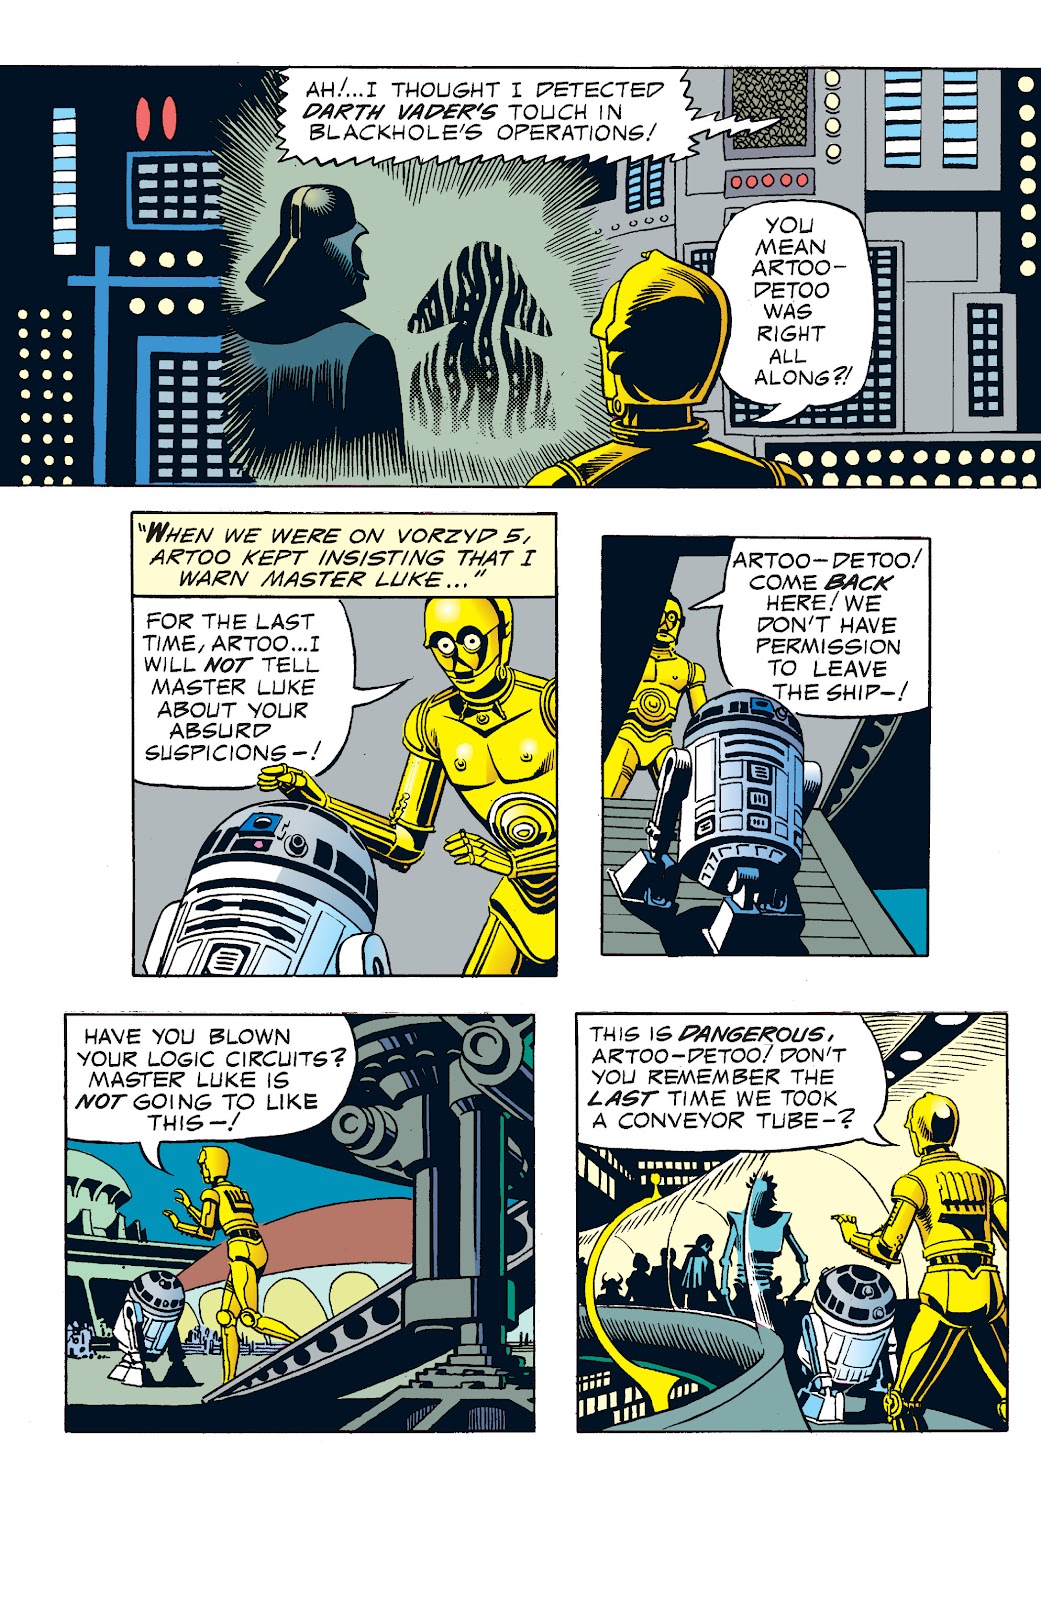 STAR WARS LEGENDS EPIC COLLECTION: THE NEWSPAPER STRIPS VOL. 2